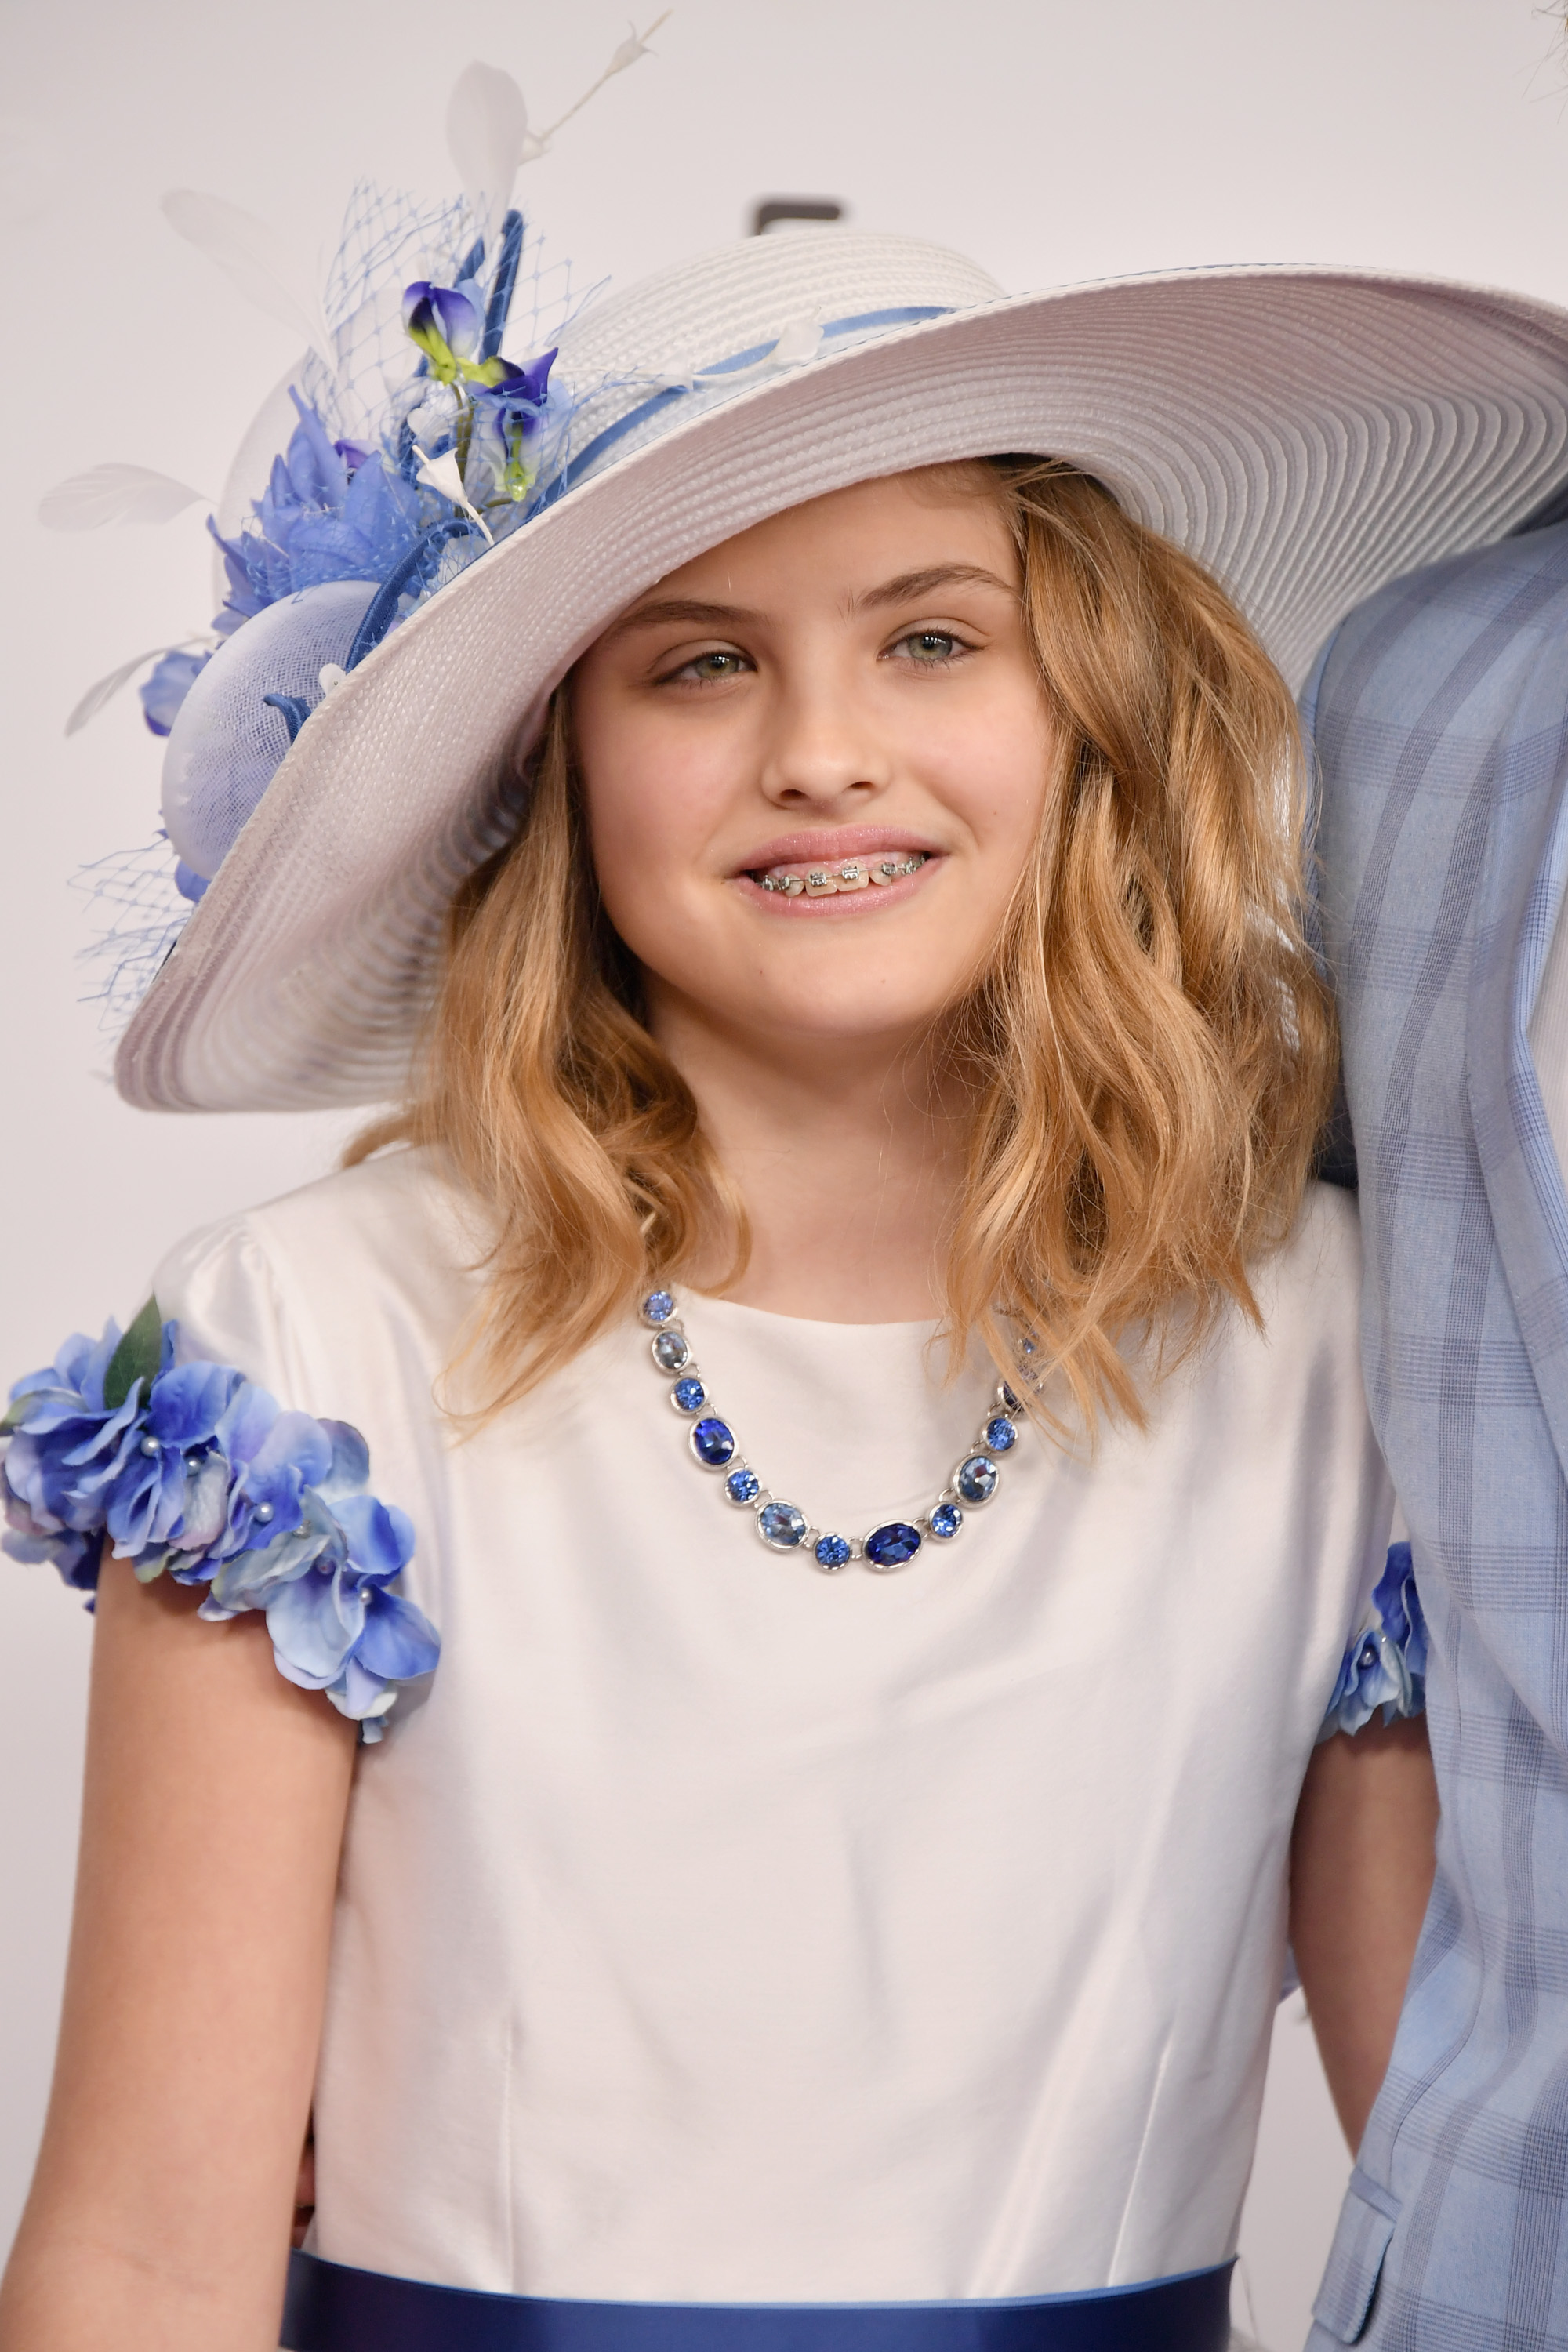 Dannielynn Birkhead attends the 144th Kentucky Derby on May 5, 2018 in Louisville, Kentucky | Source: Getty Images